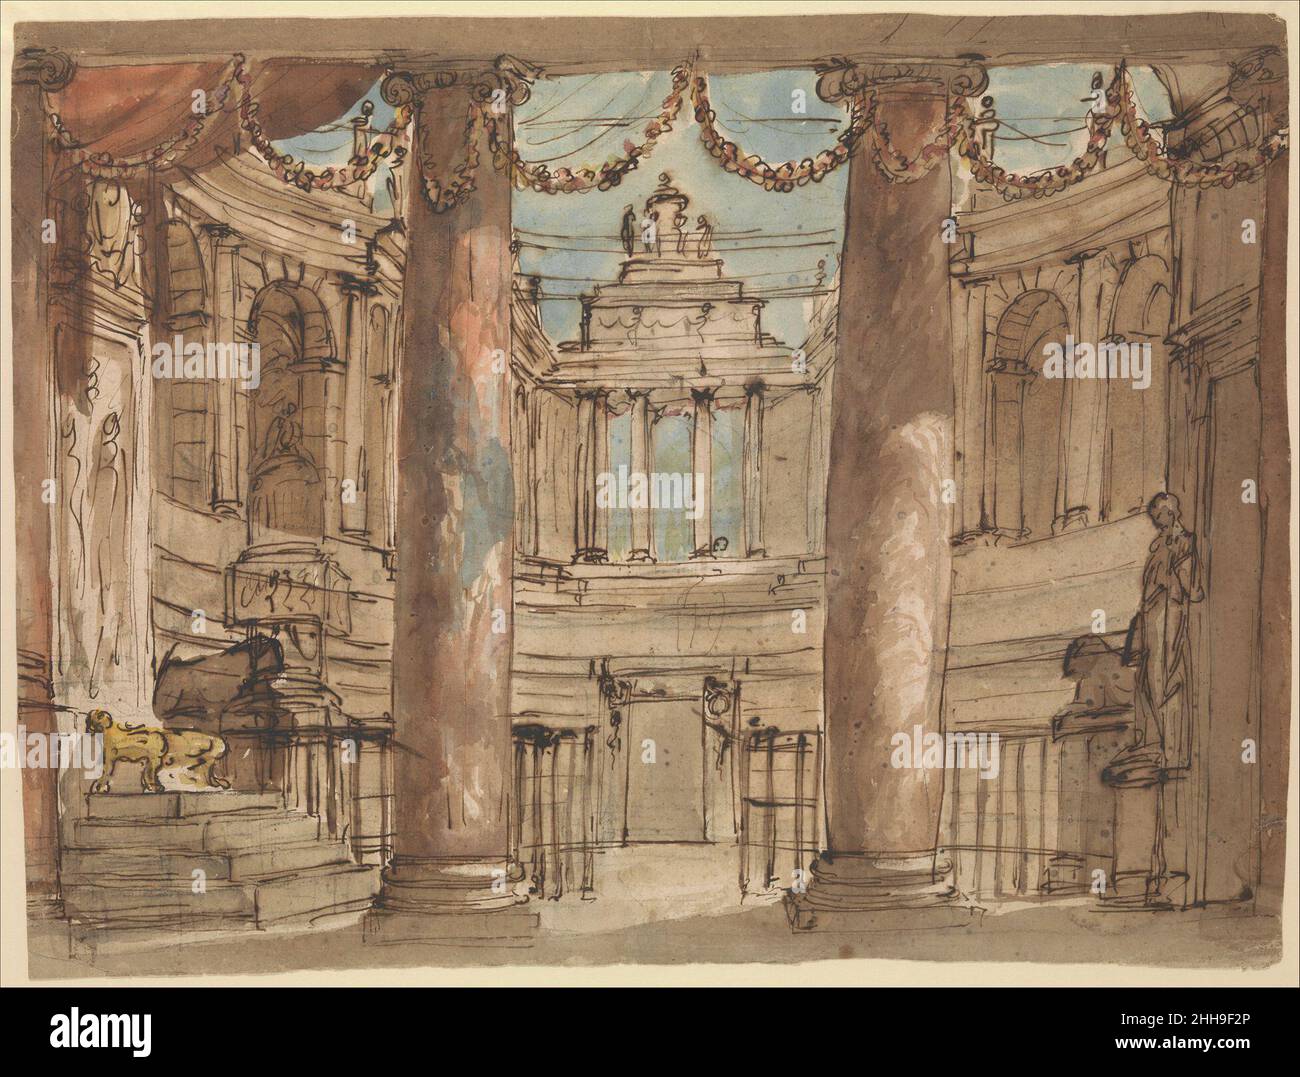 Design for a Stage Set 1770–80 Giuseppe Barberi Italian A prodigious draughtsman, Barberi designed many architectural projects that remained for the most part unexecuted. He was trained as a silversmith under Luigi Valadier, father of the Roman neoclassic architect, Giuseppe Valadier. Many of Barberi's drawings, including this one, were wrongly attributed to the younger Valadier until Berliner showed them to be the innovative products of Barberi's fertile imagination. Most of Barberi's drawings are in the Cooper-Hewitt Museum and the Museo di Roma. They show Barberi to have been one of Rome's Stock Photo